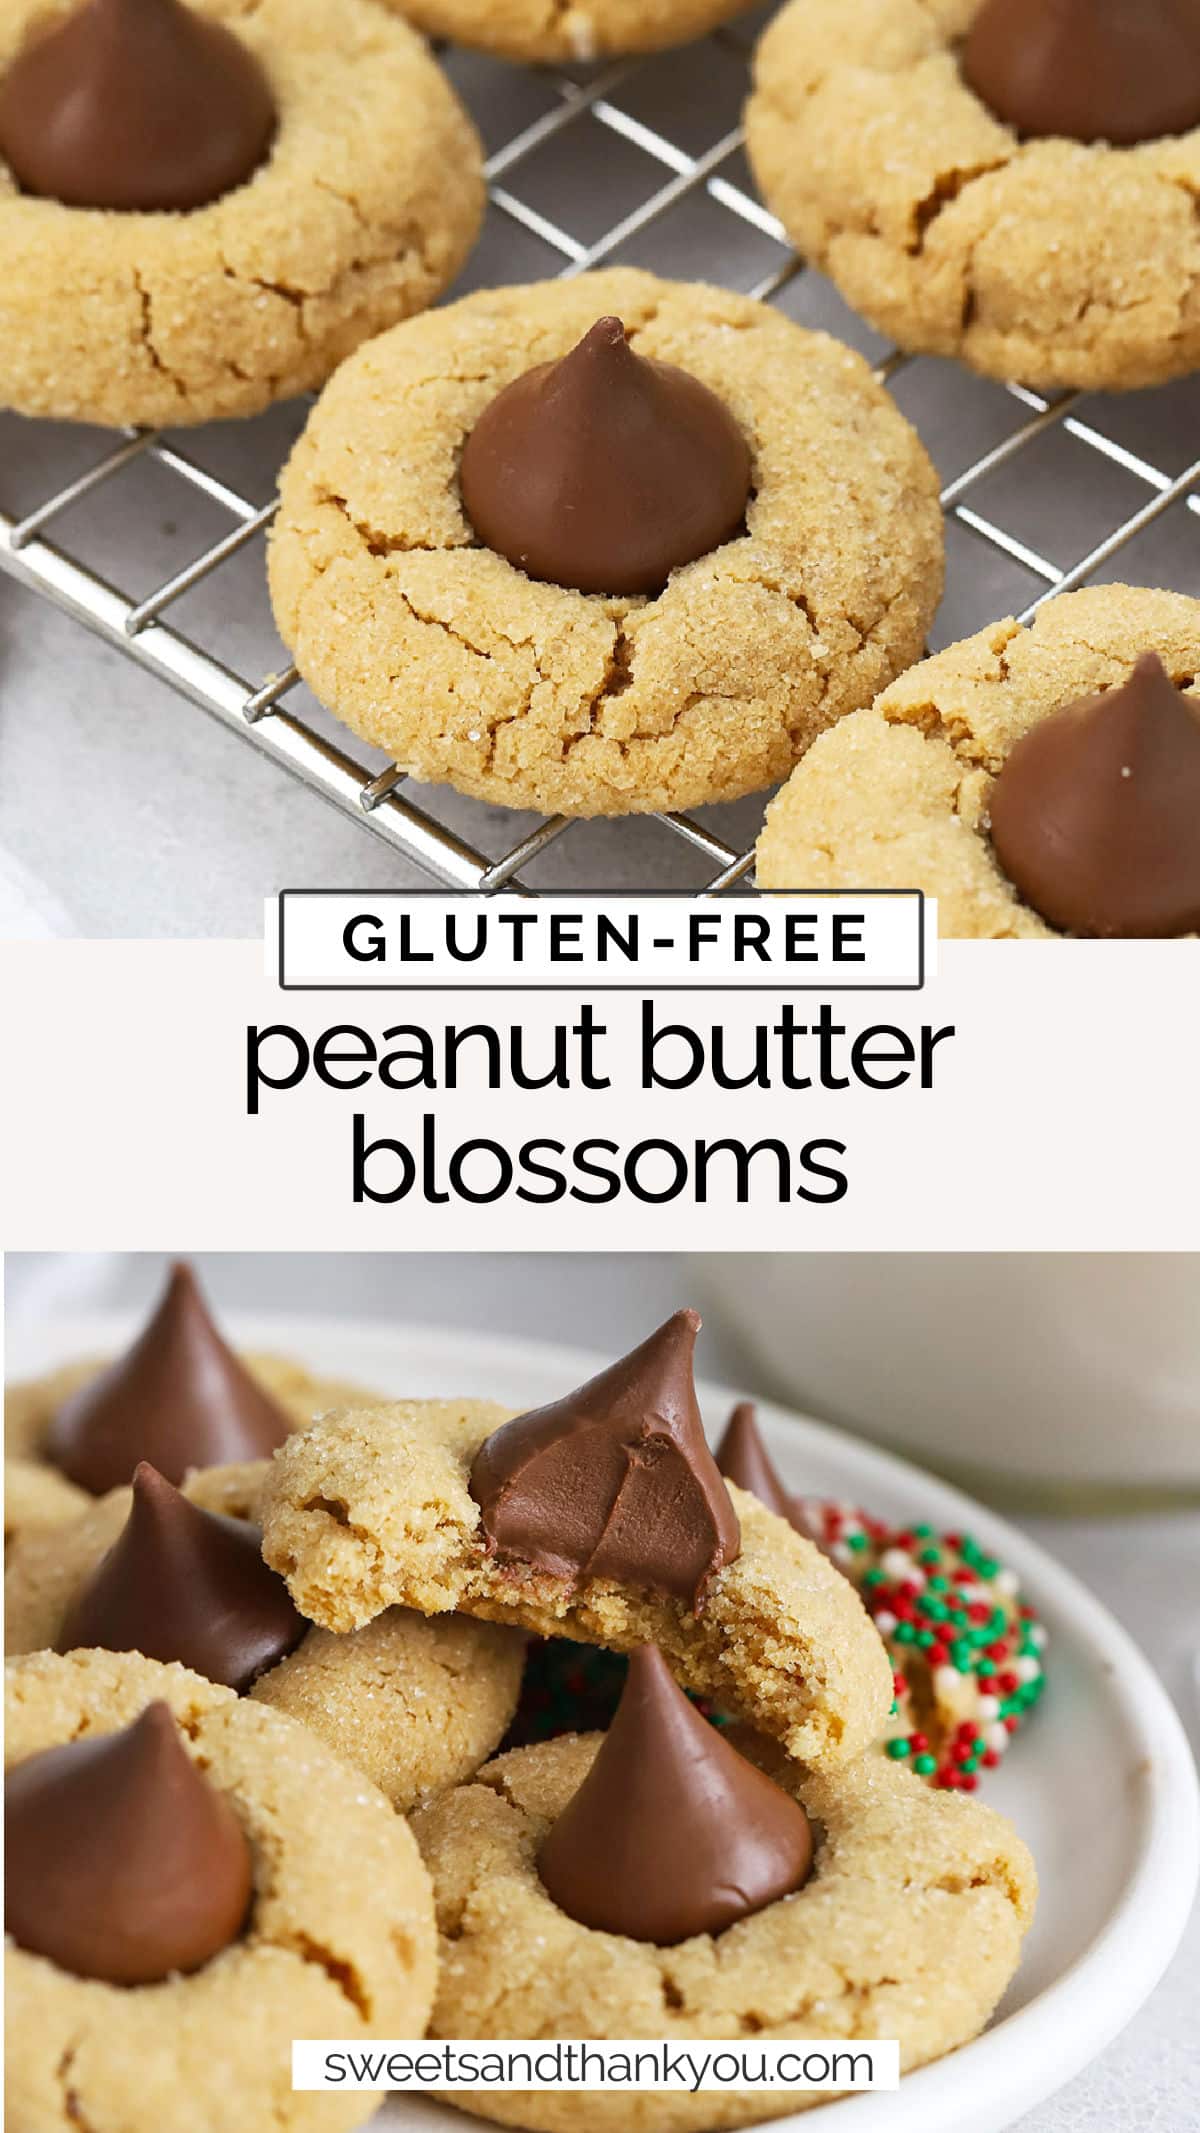 Gluten-Free Peanut Butter Blossoms - This gluten-free peanut butter blossom recipe combines soft, chewy peanut butter cookies with chocolate kiss candies. // gluten free peanut butter blossoms recipe / easy gluten-free peanut butter blossom cookies / gluten-free christmas cookies / gluten-free holiday cookies / gluten-free blossom cookies / gf peanut butter blossoms recipe / the best gluten-free peanut butter blossoms / gluten-free cookie exchange recipes